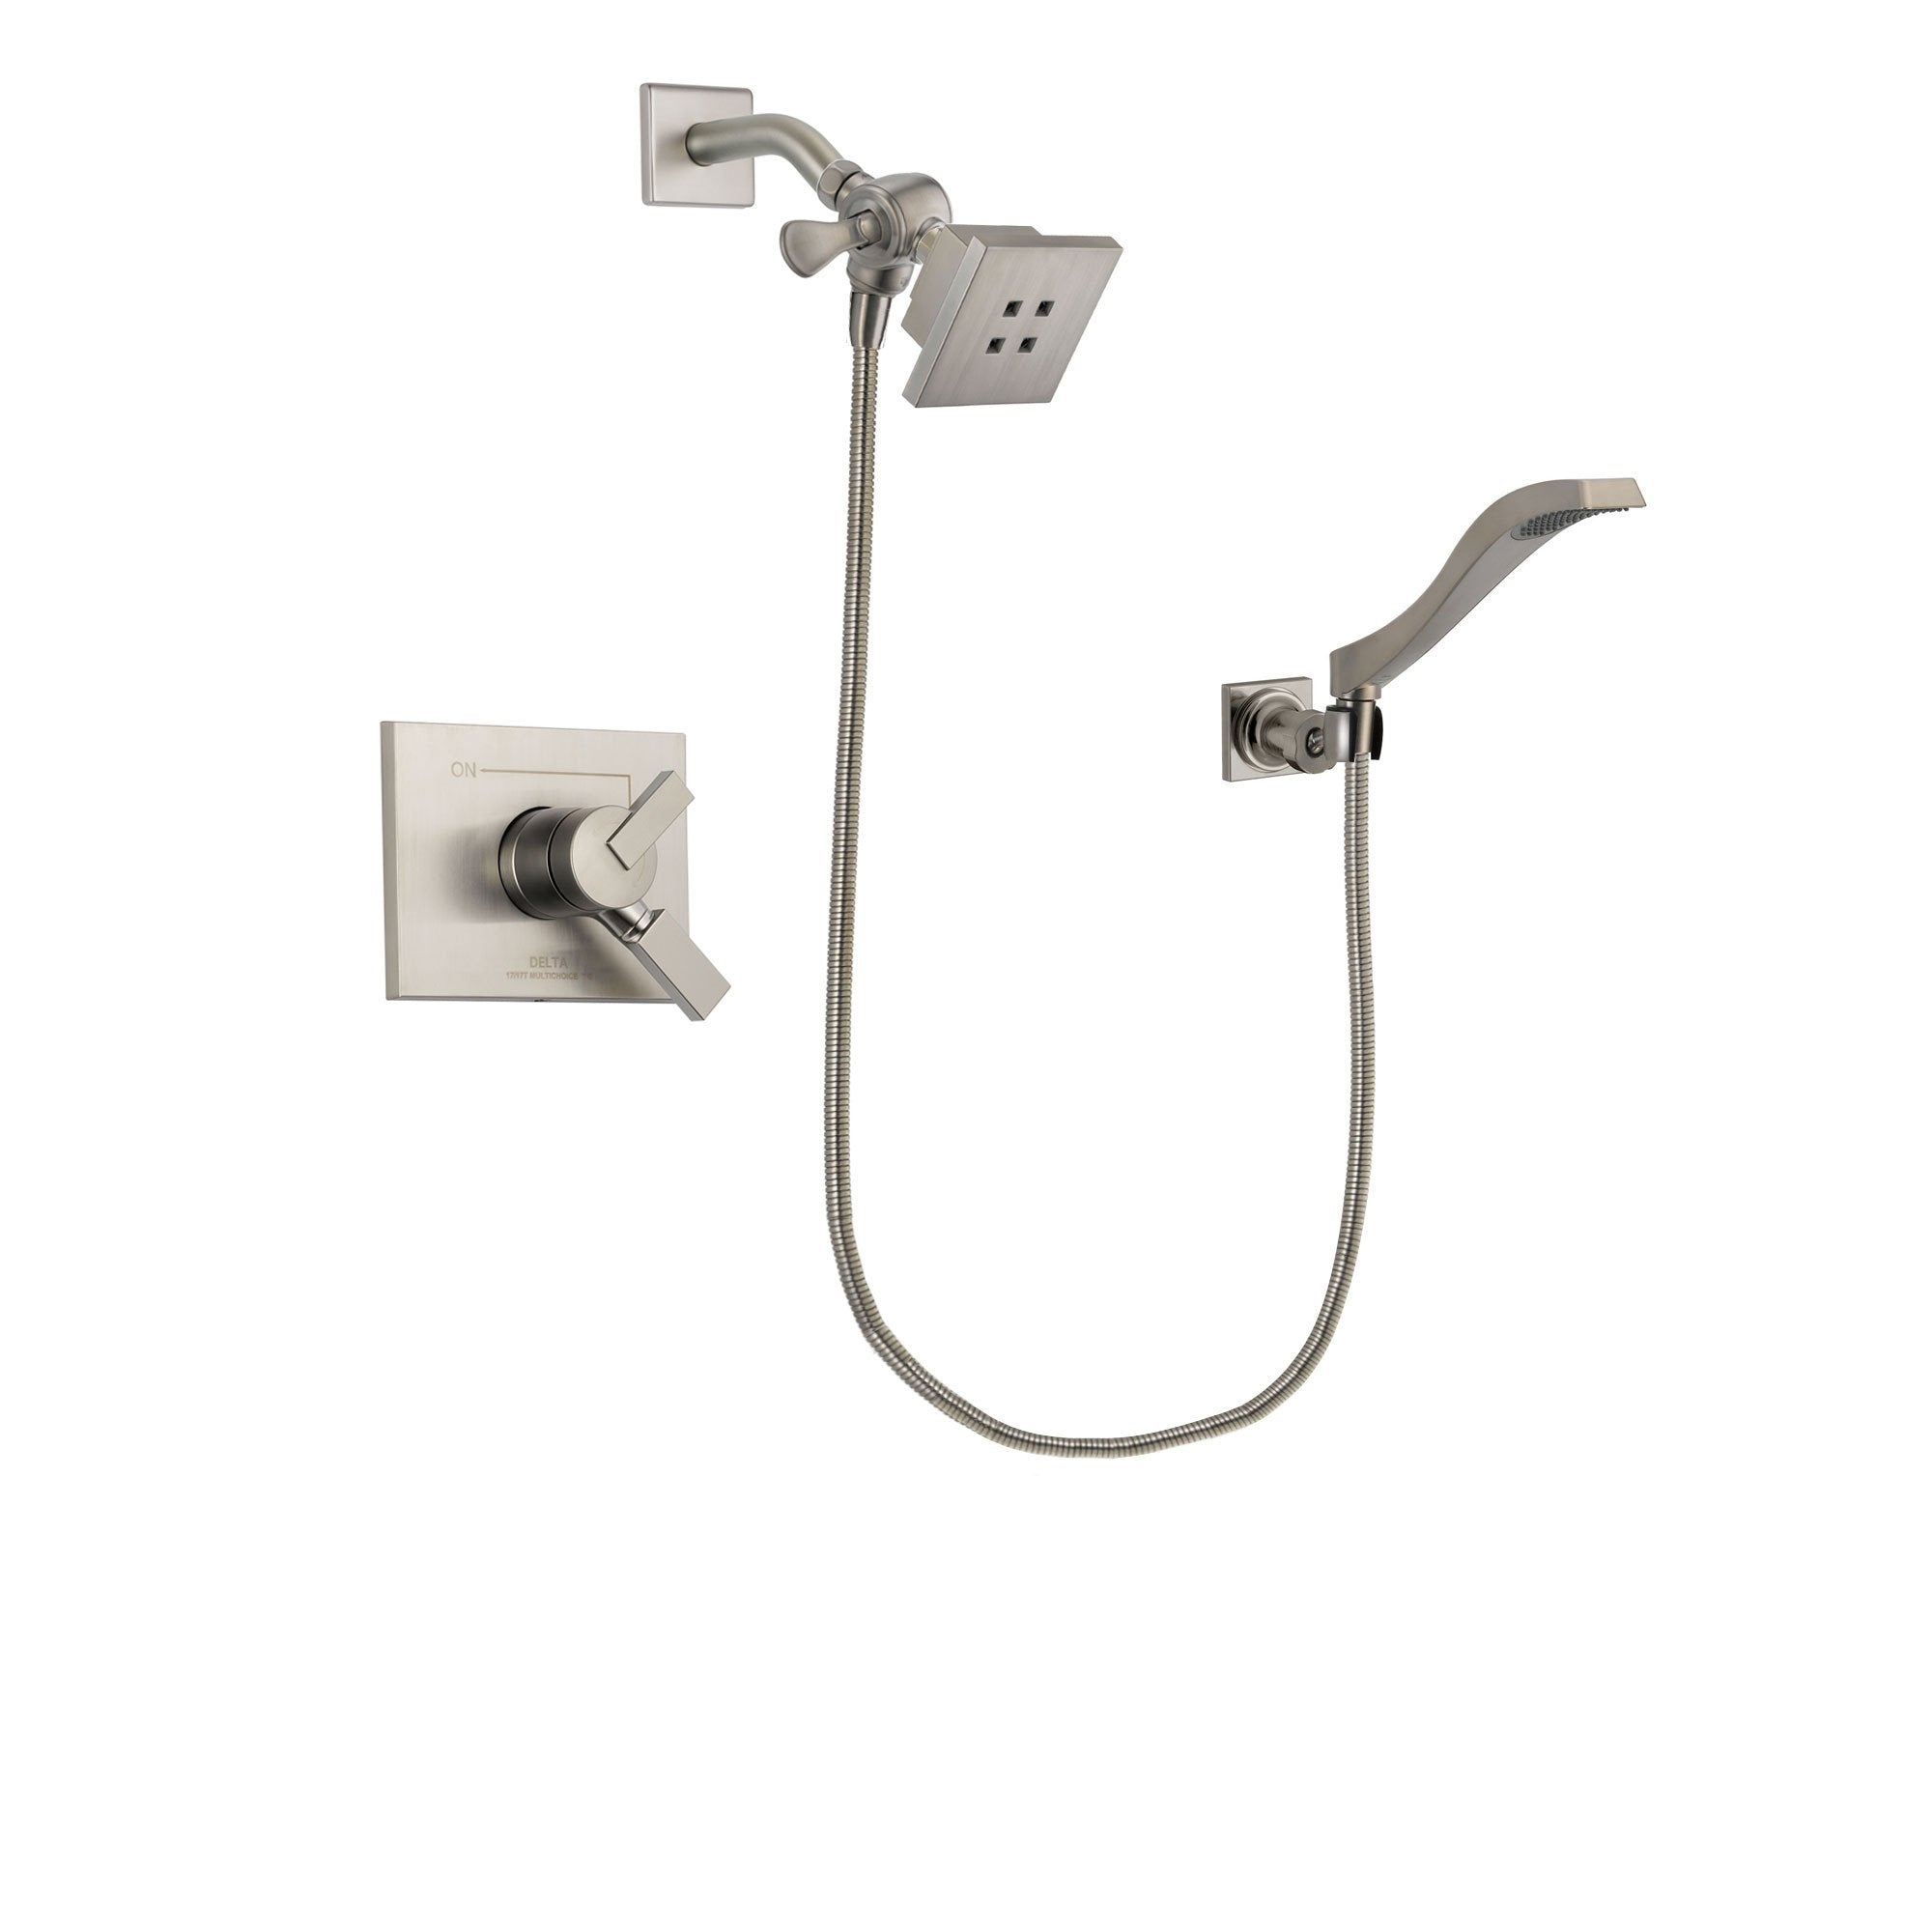 Delta Vero Stainless Steel Finish Dual Control Shower Faucet System Package with Square Showerhead and Modern Wall Mount Handheld Shower Spray Includes Rough-in Valve DSP2072V